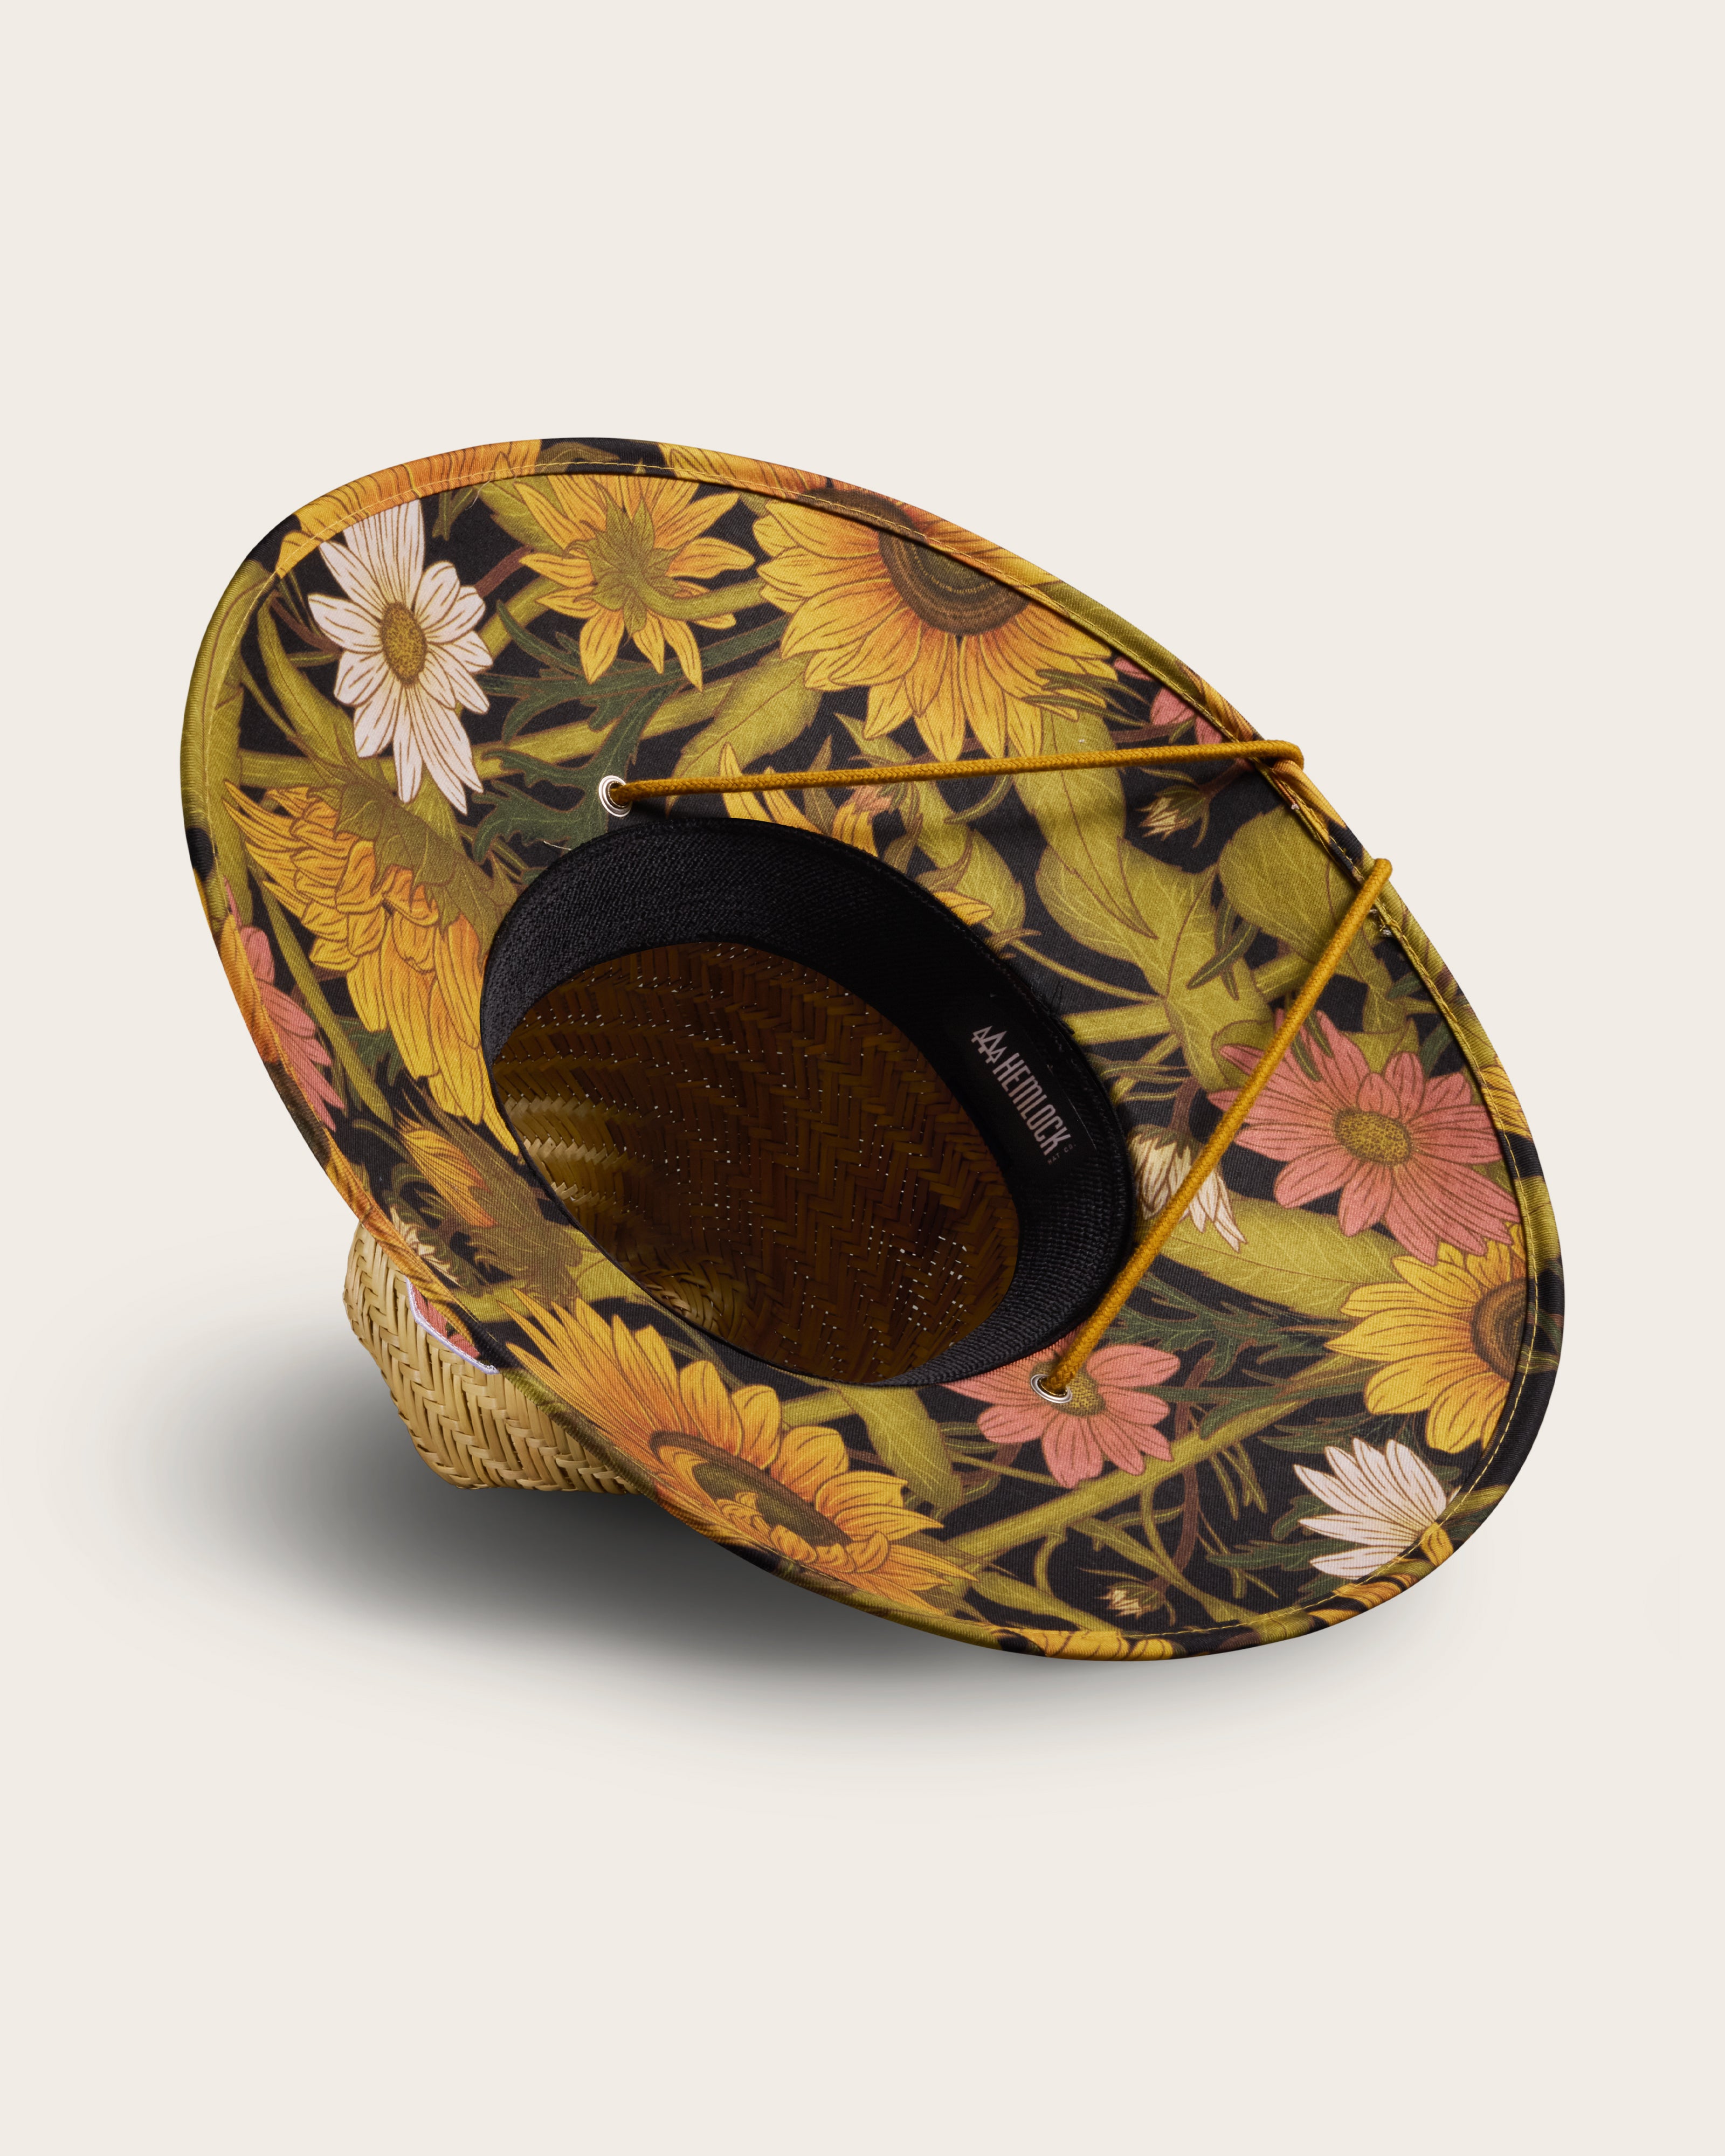 Hemlock Woodstock straw lifeguard hat with sunflower pattern detailed view